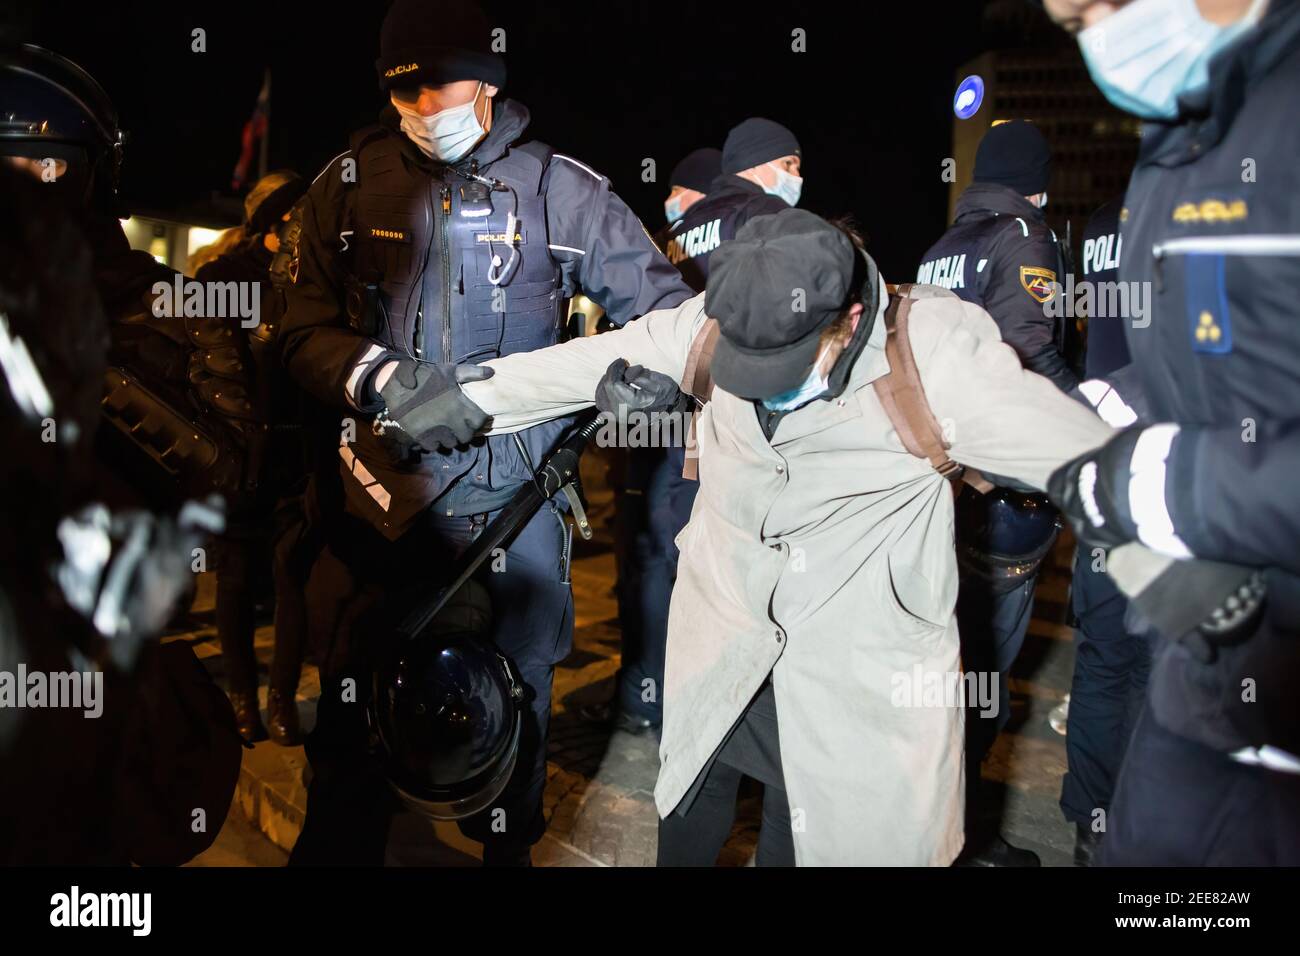 Policemen arrest a woman during an anti-government protest in Ljubljana. The protests against Slovenian Prime Minister Janez Jansa continued on the day that the National Assembly debated a motion of no confidence in the government. The no-confidence vote was initiated by the opposition that accuses the government of authoritarianism. Stock Photo